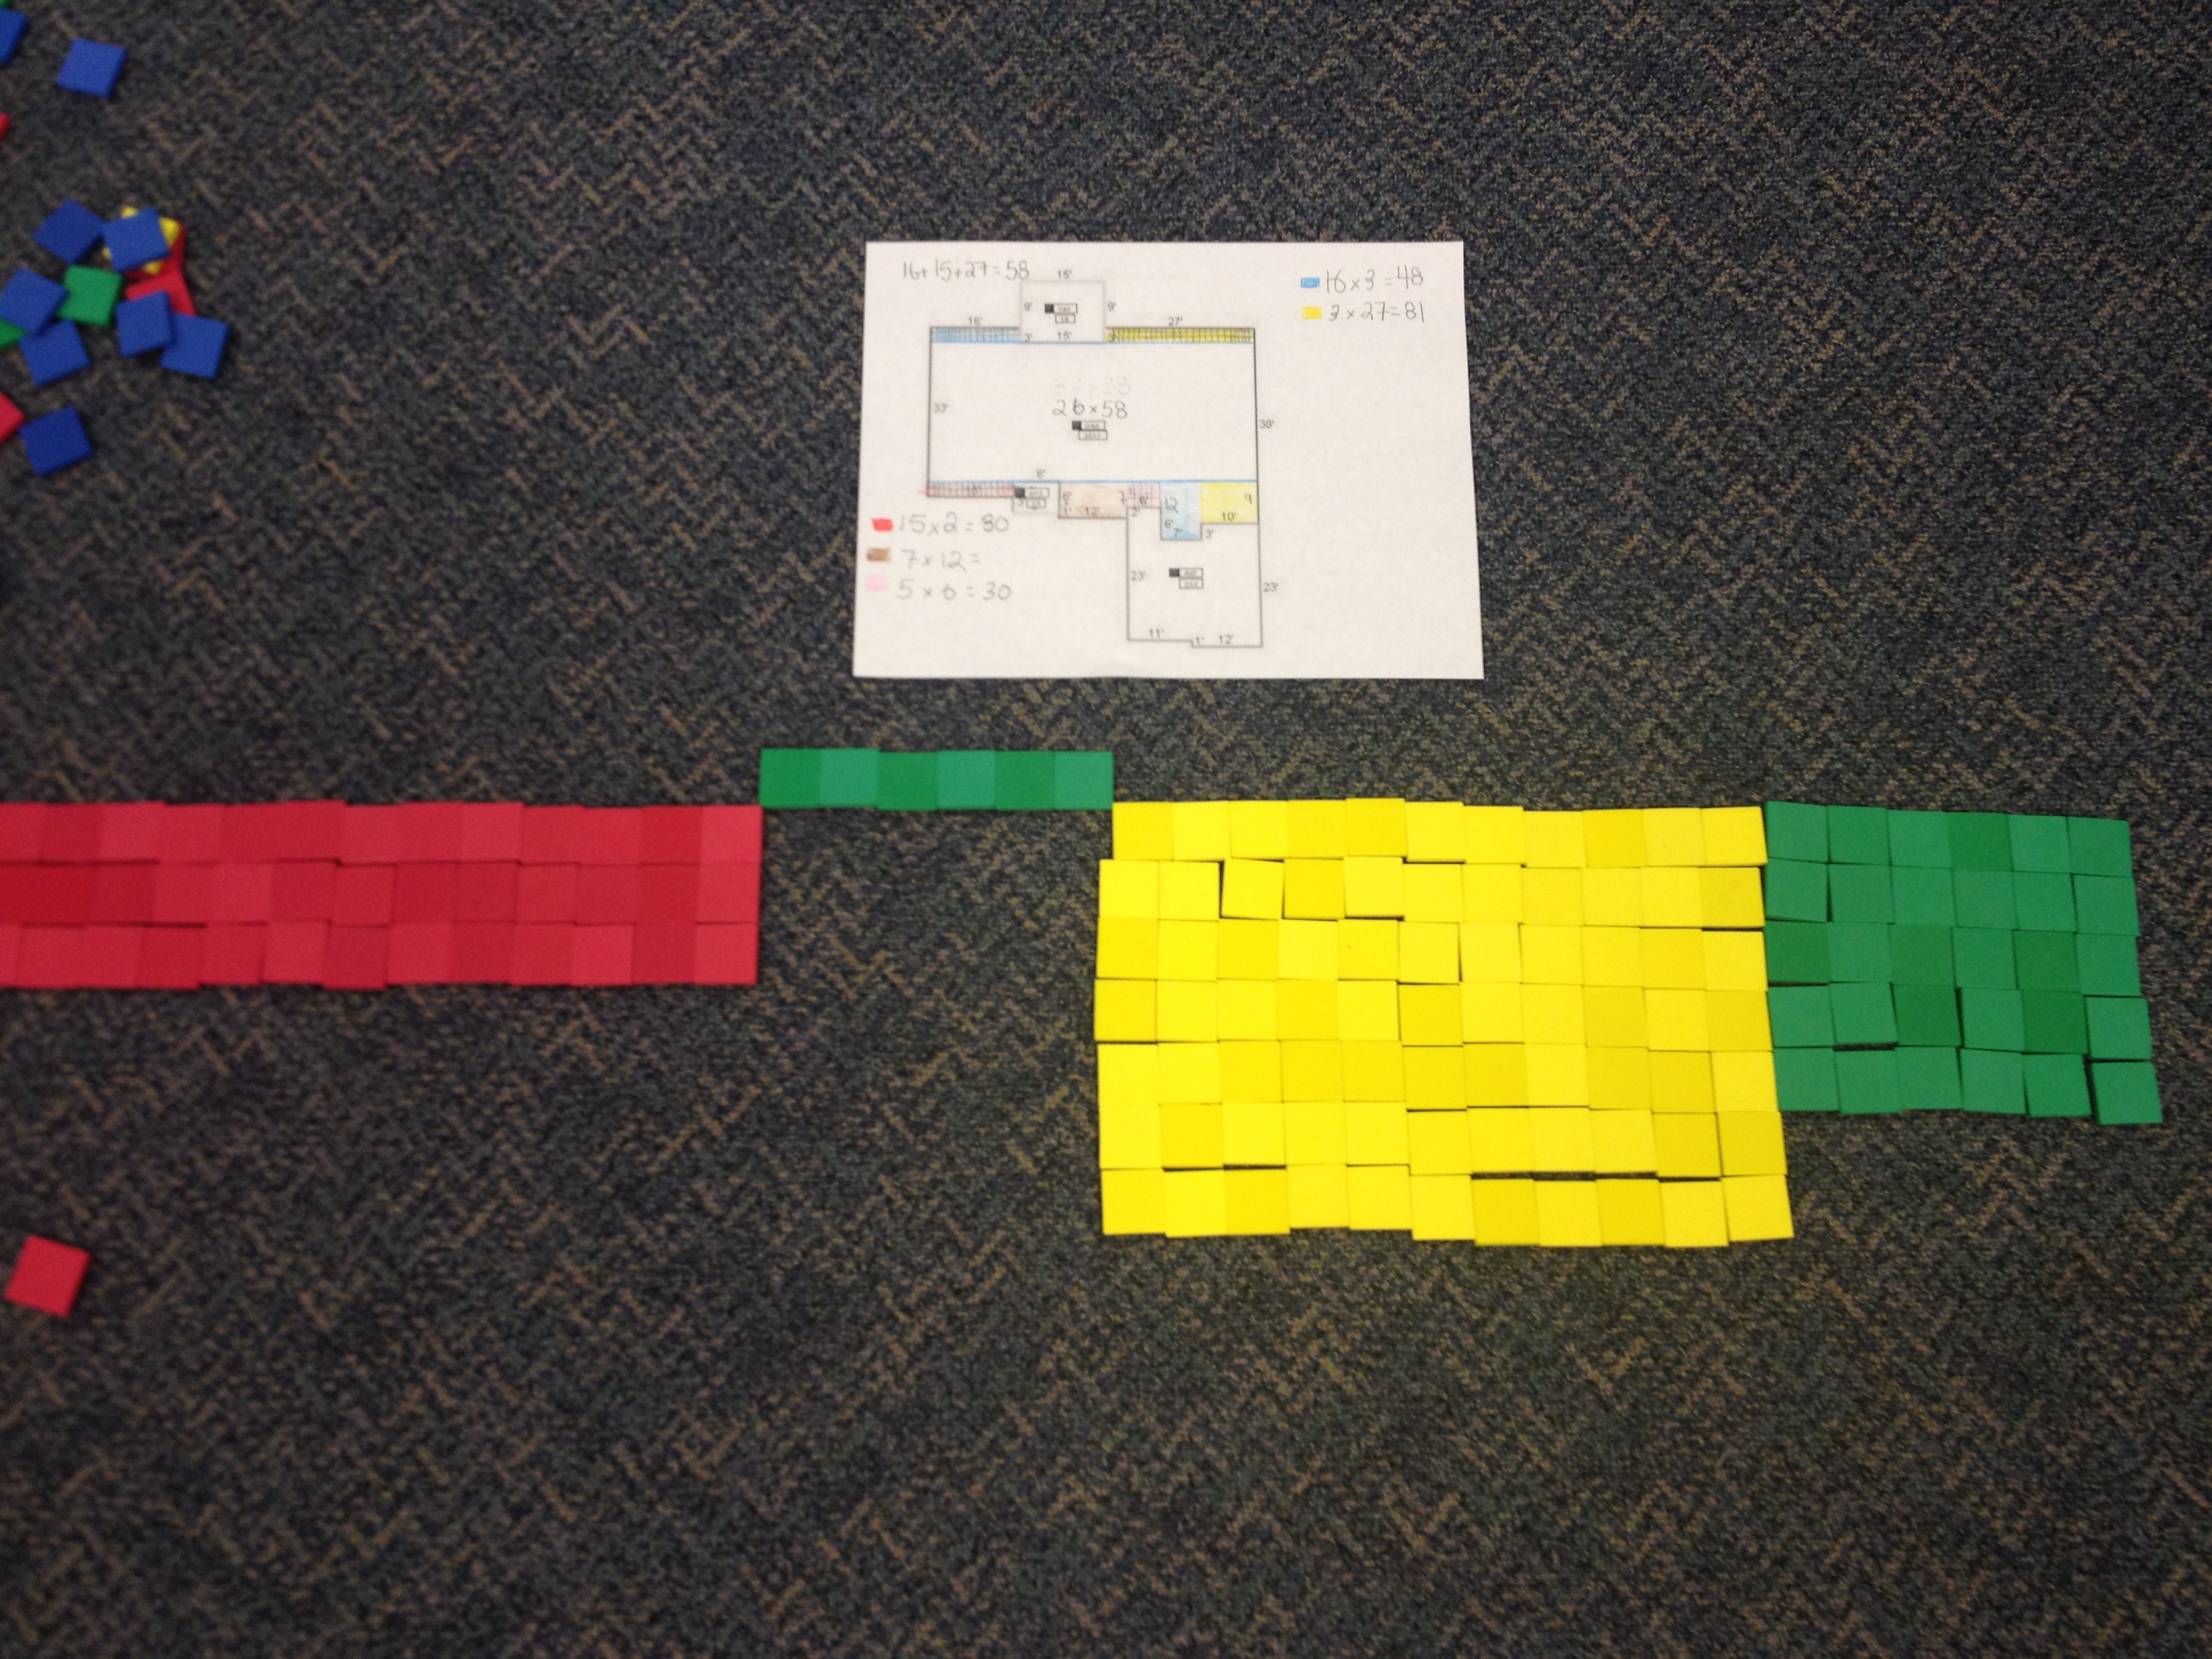  Use of tiles to construct the partitioned area.